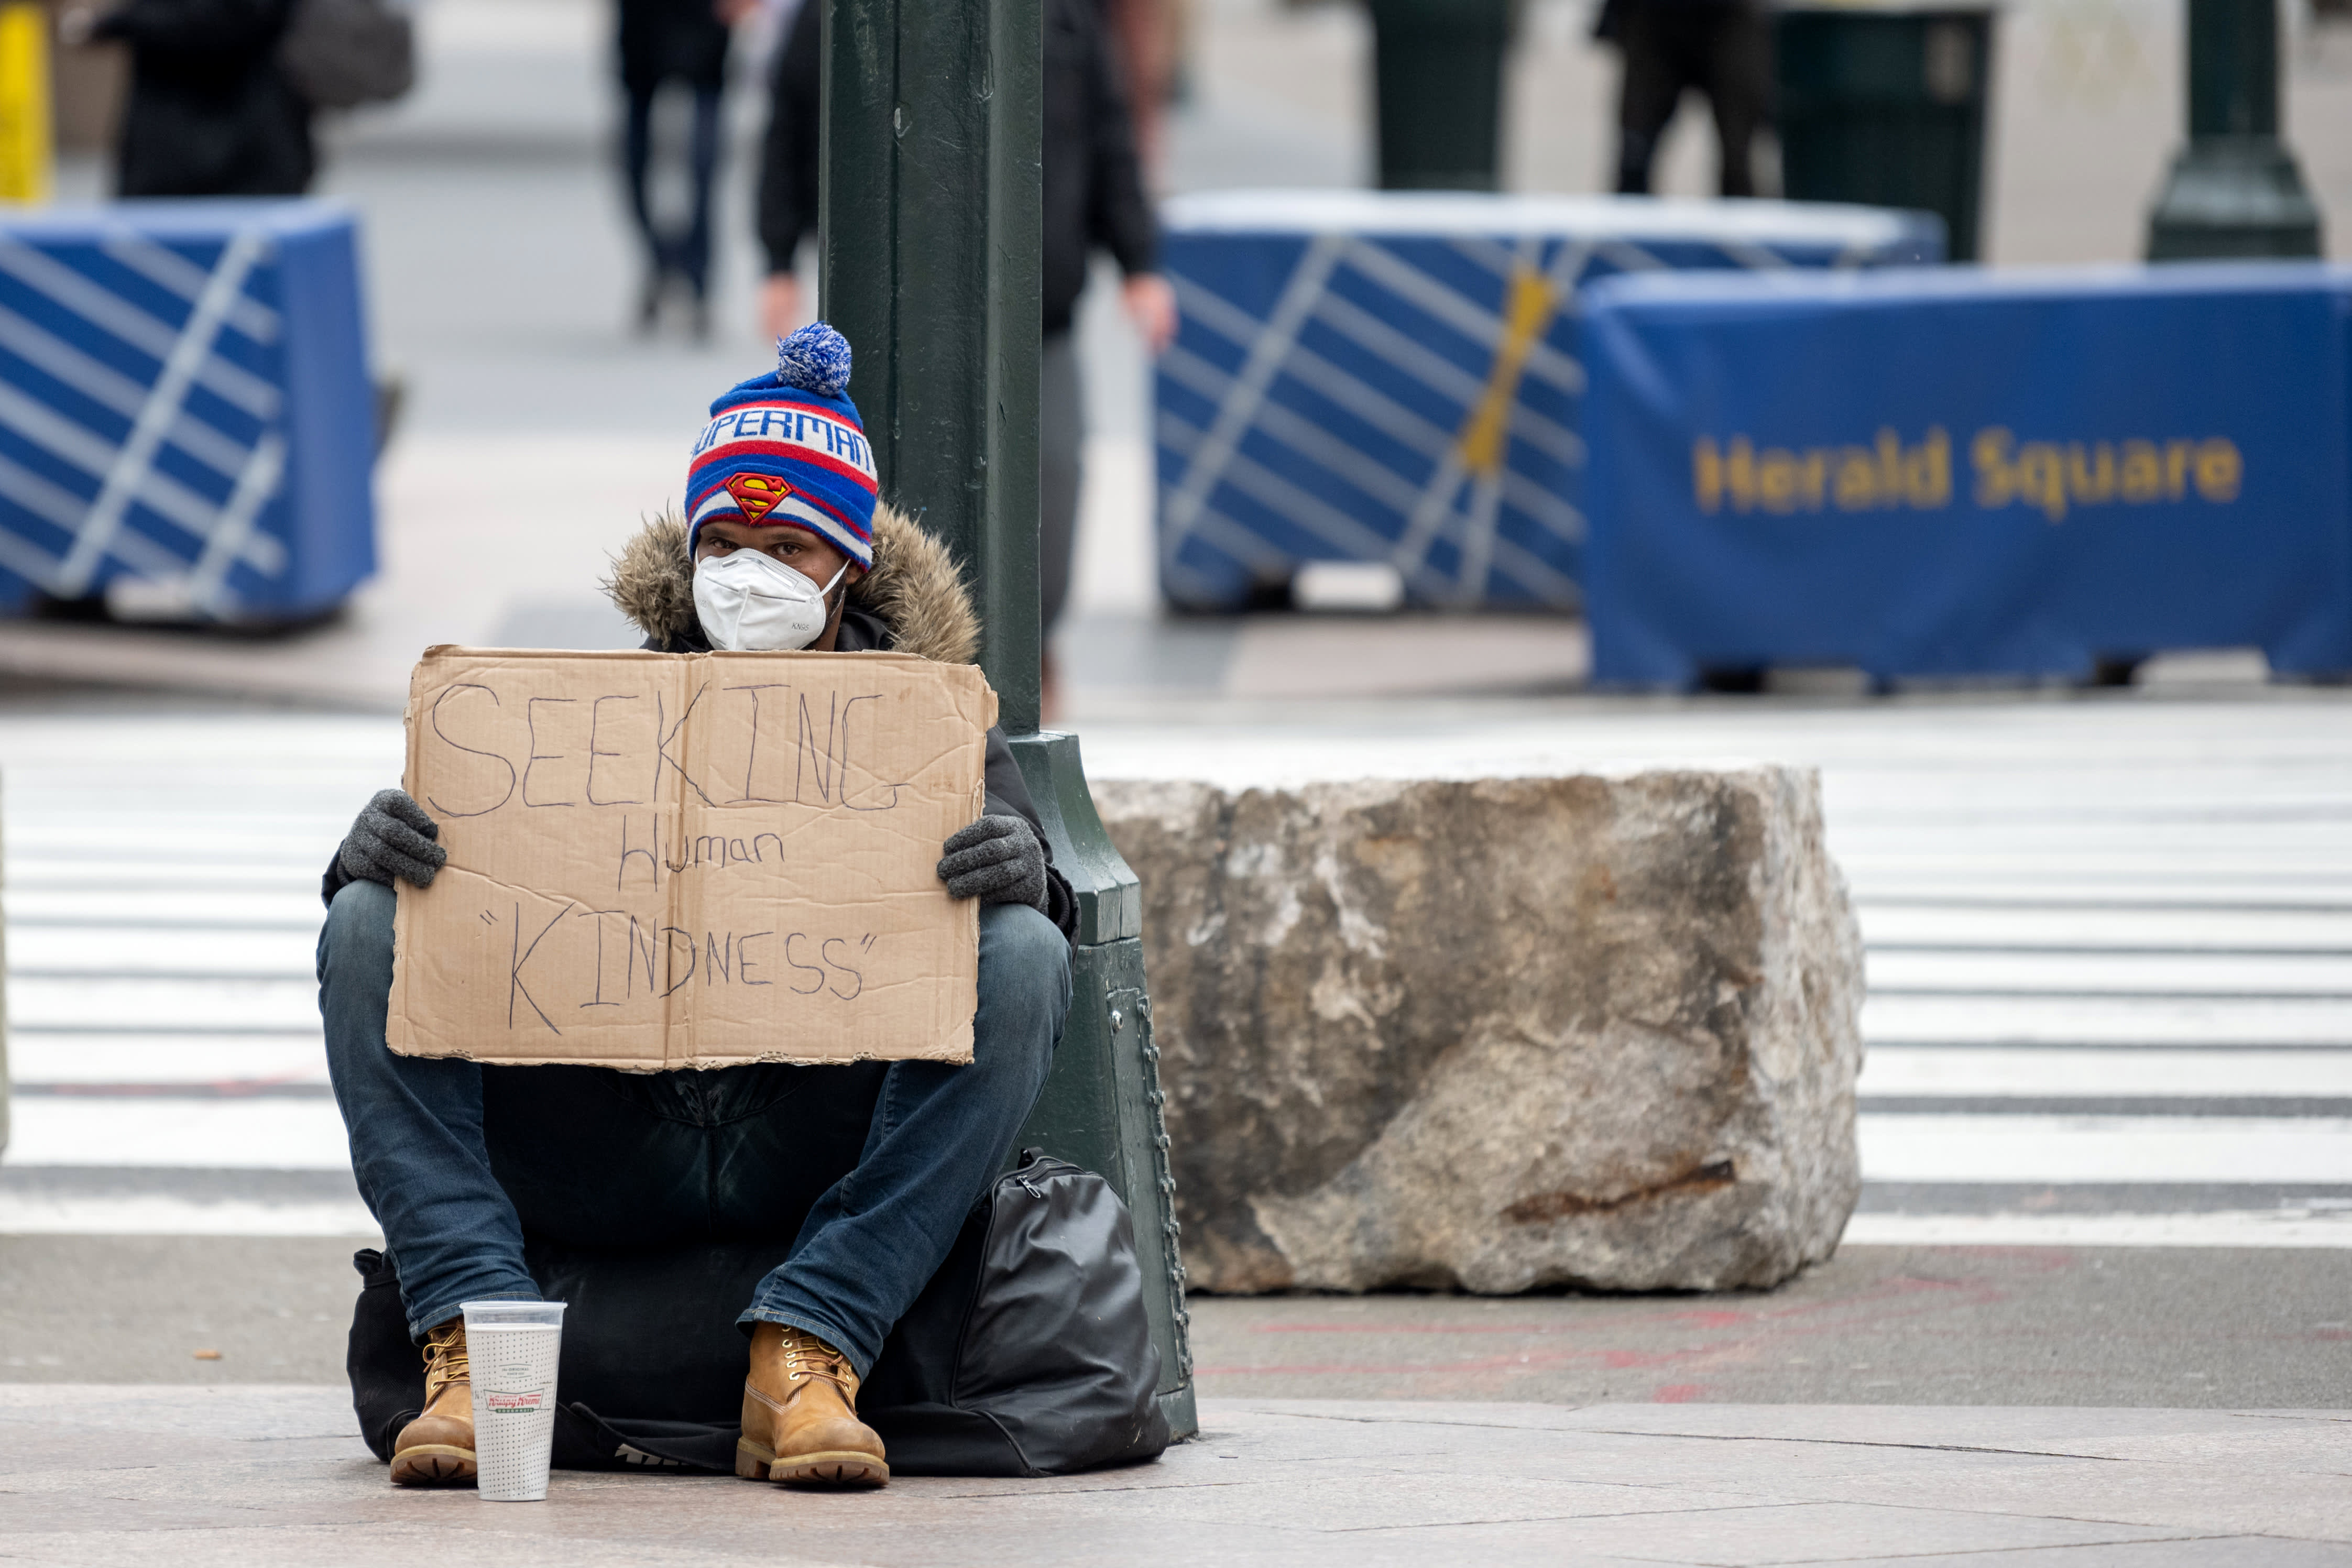 Why the U.S. can’t solve the homelessness crisis